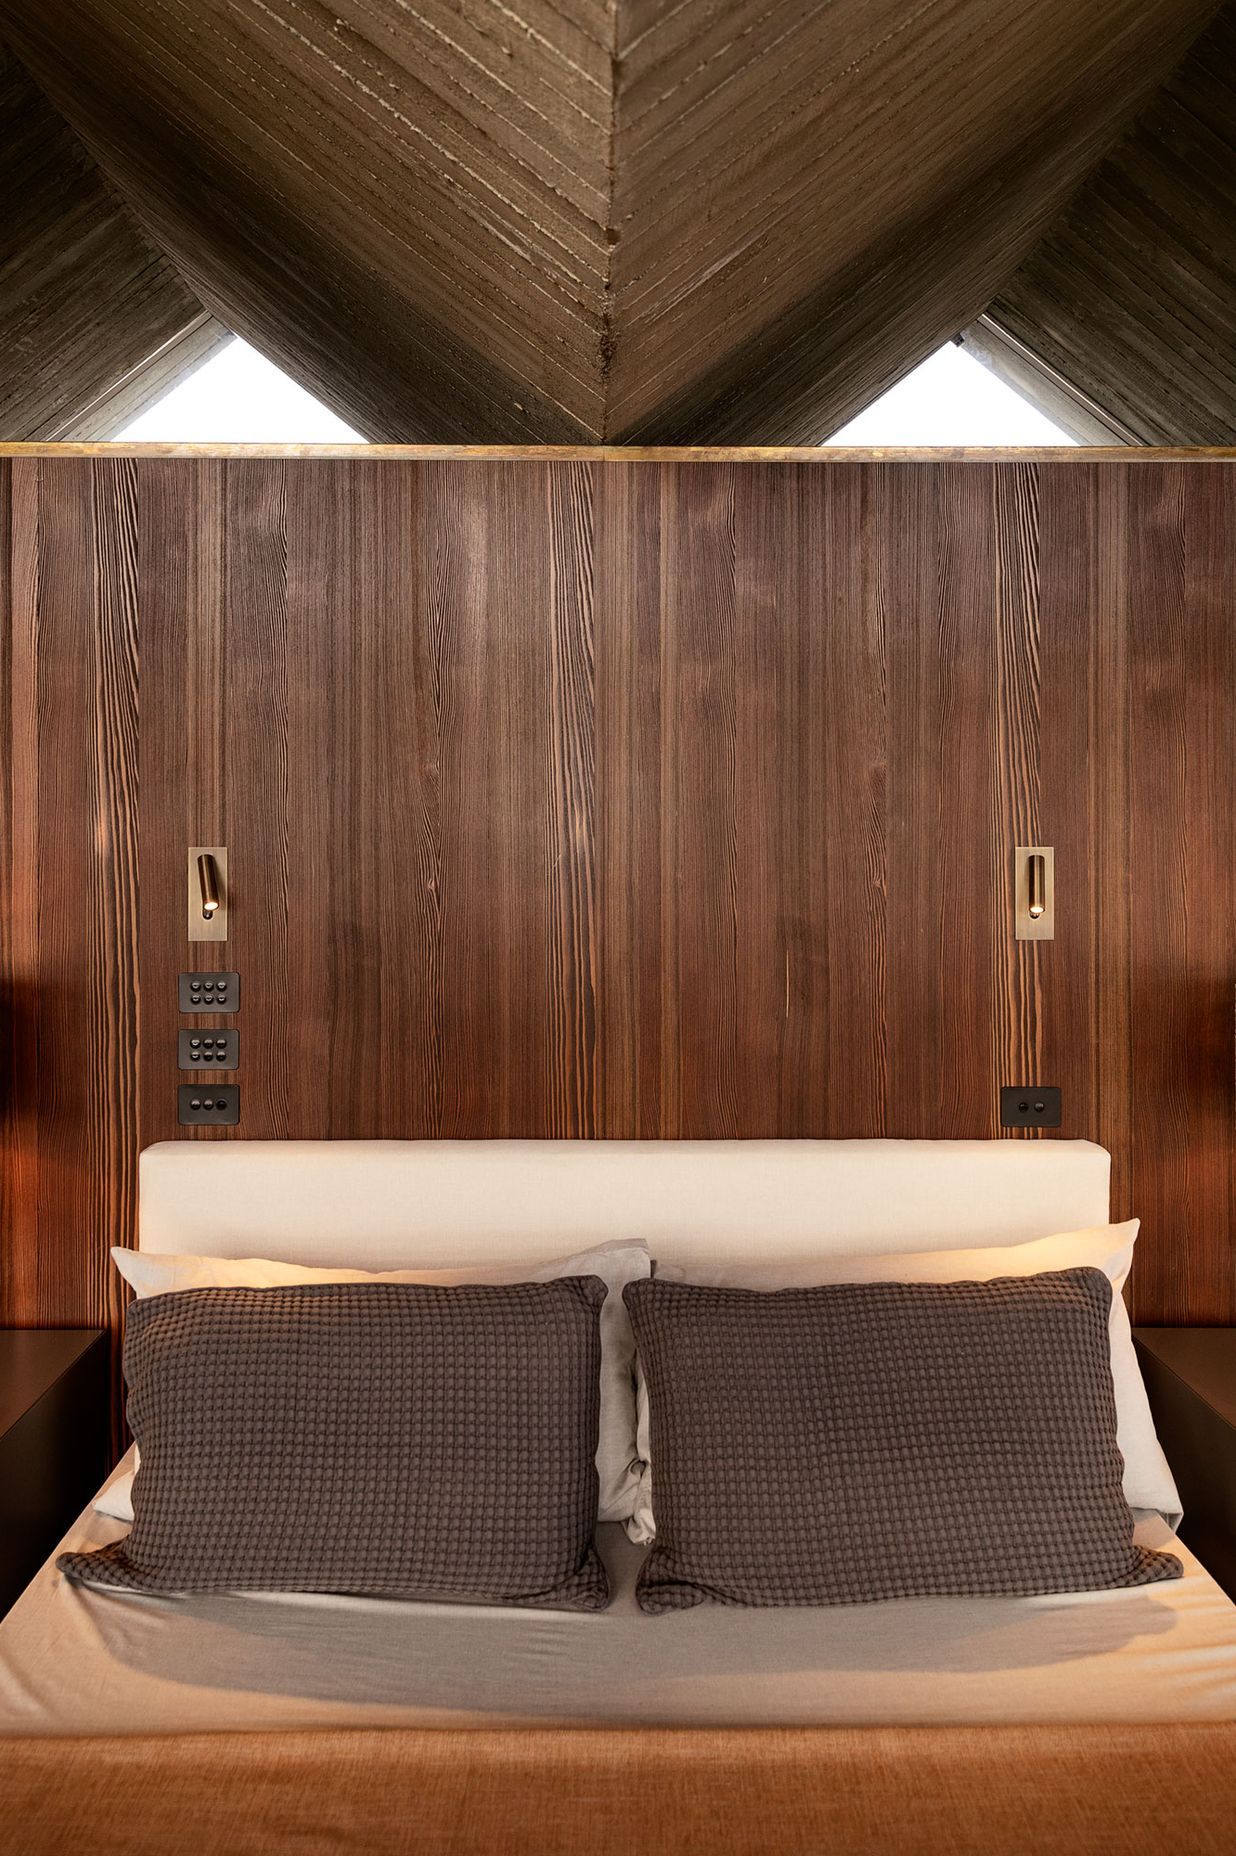 Timber, concrete and brass provide a natural material palette in the guest suite.